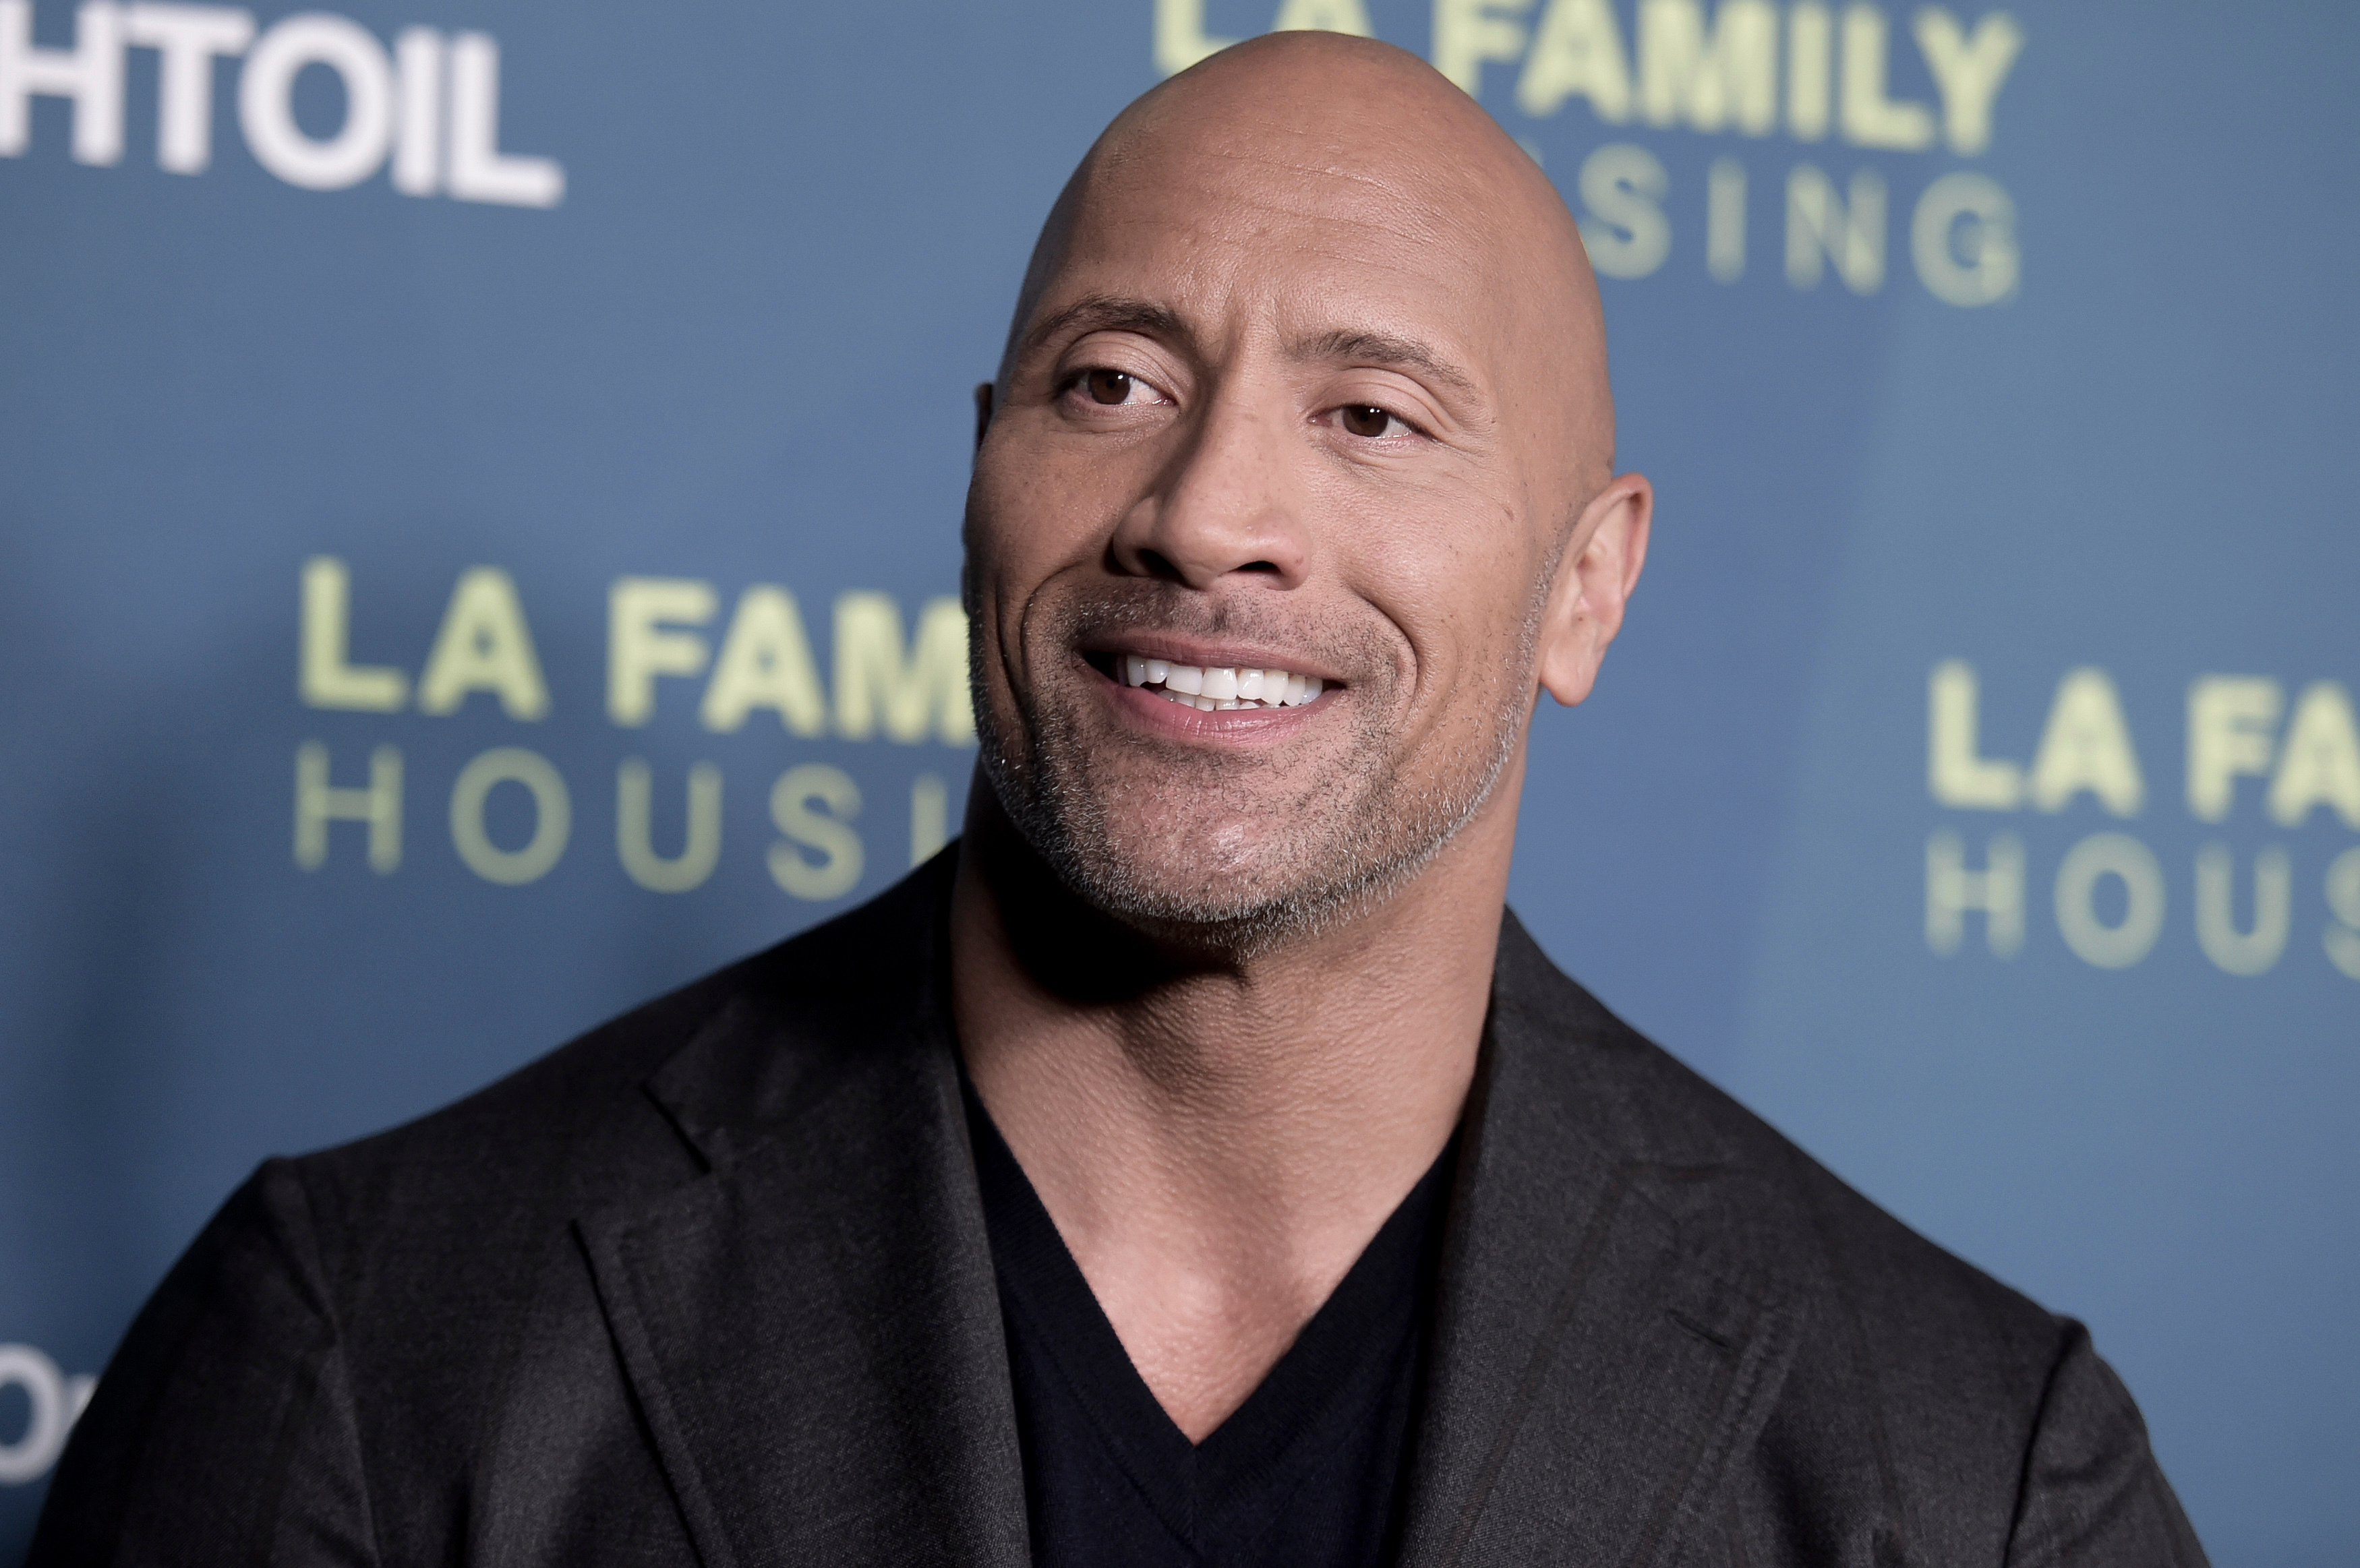 Dwayne has become one of the most successful actors in the US and won't ever give up bodybuilding, says an expert